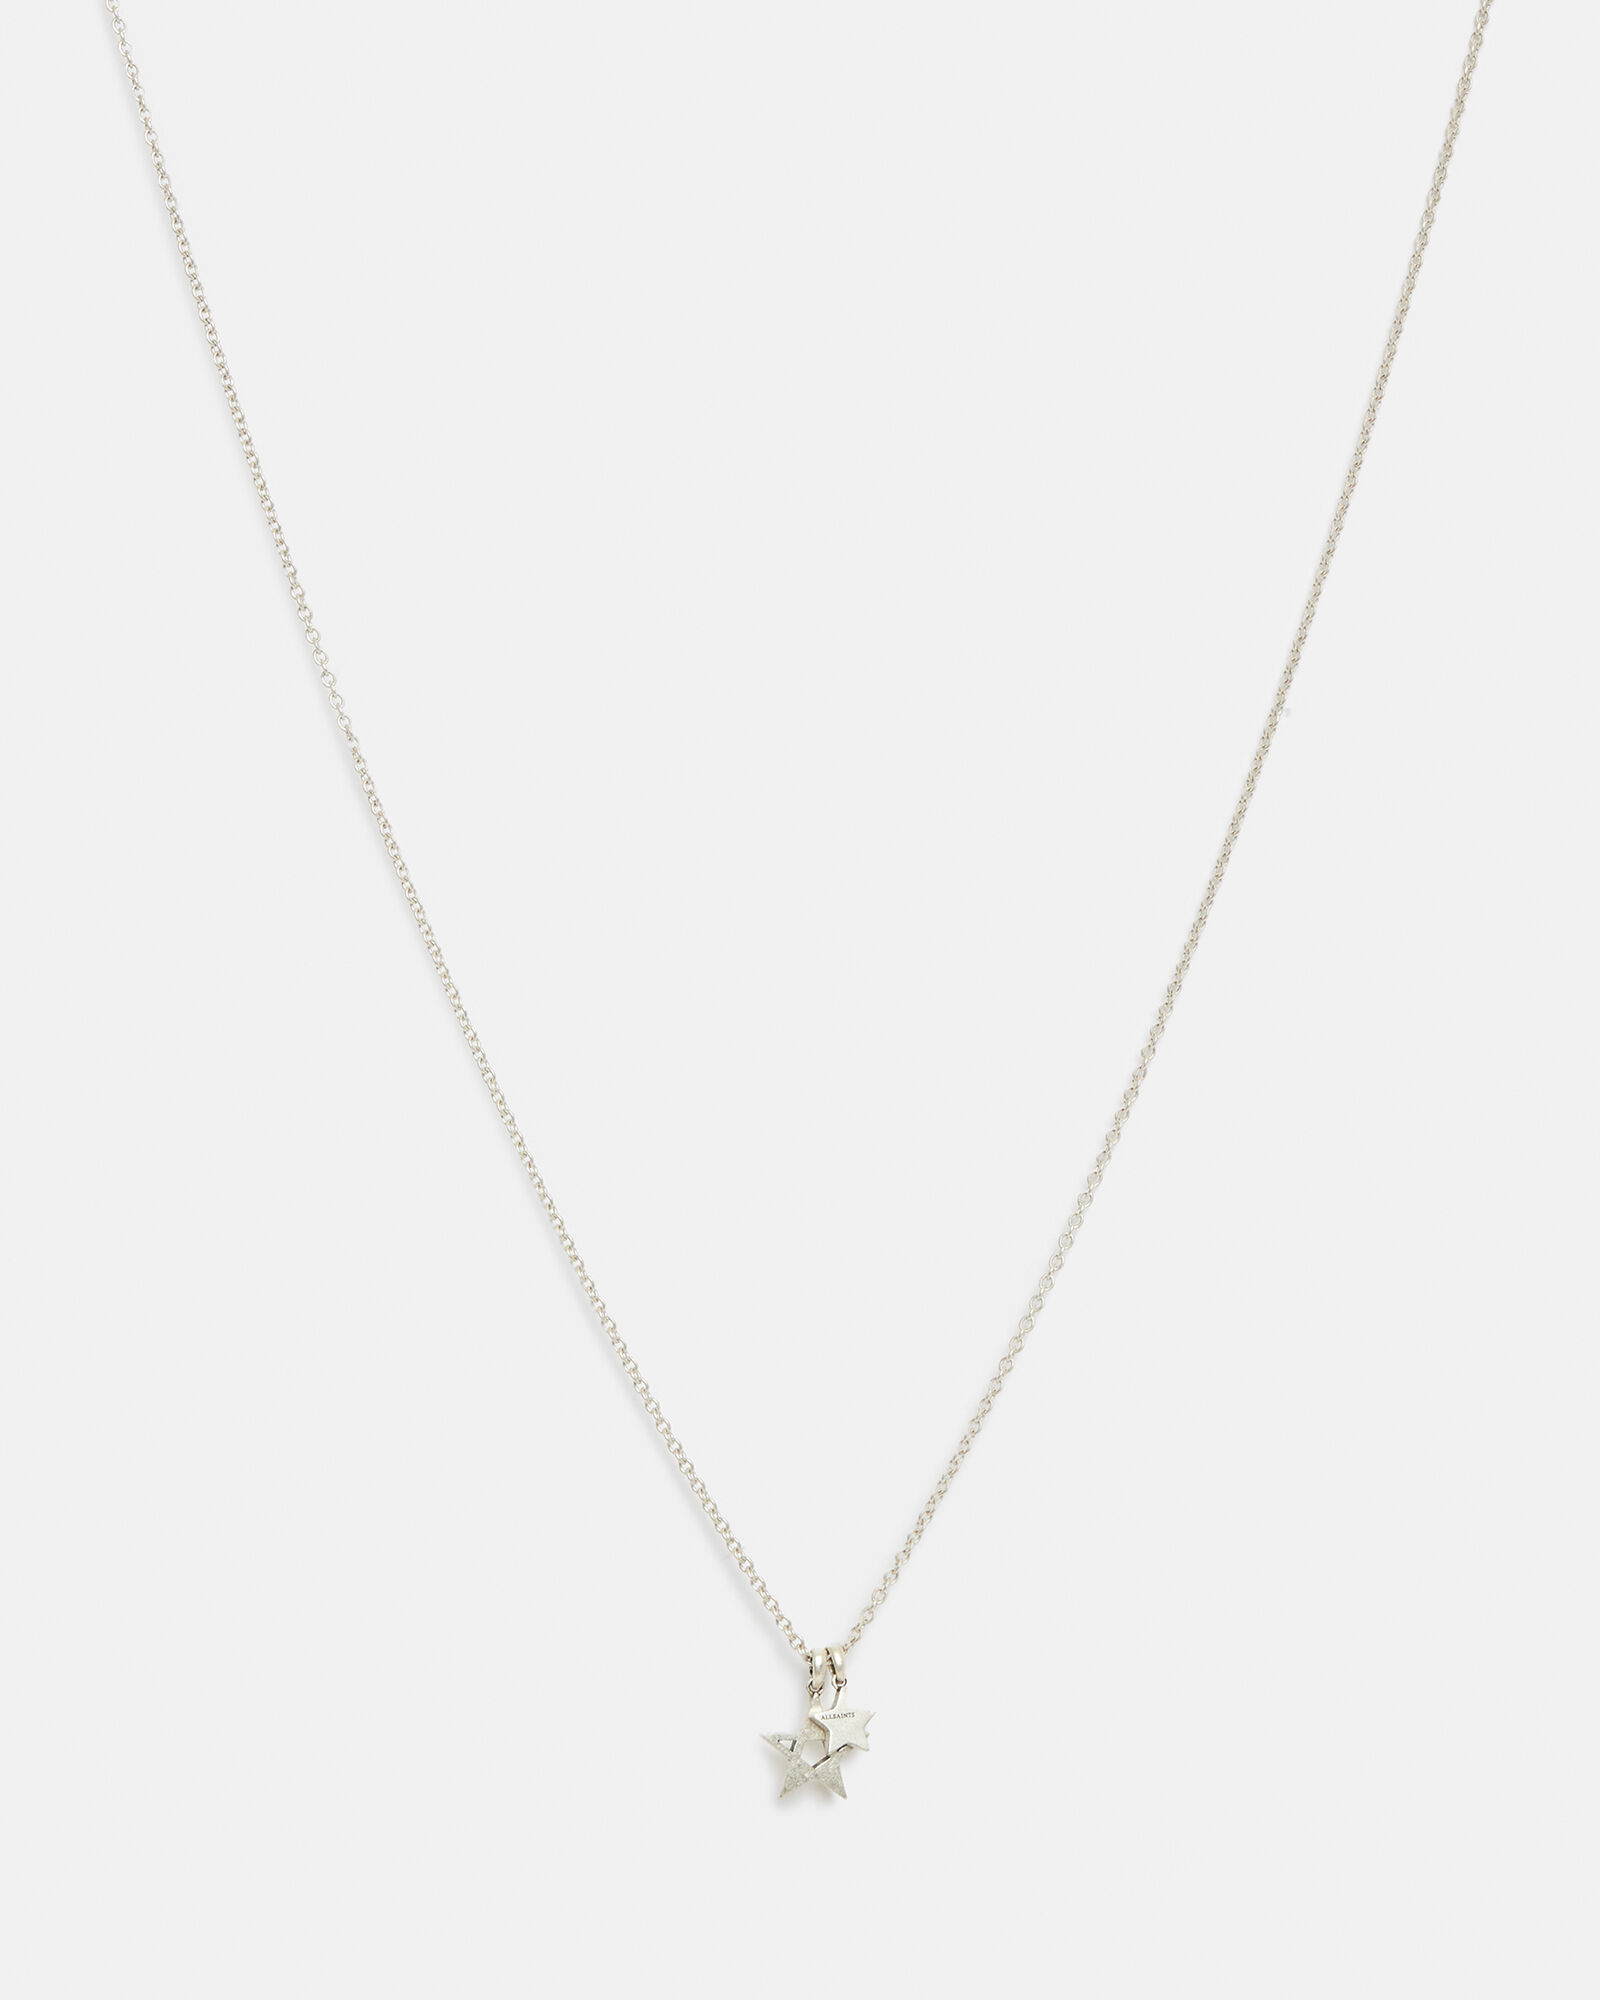 Astar Sterling Silver Star Charm Necklace